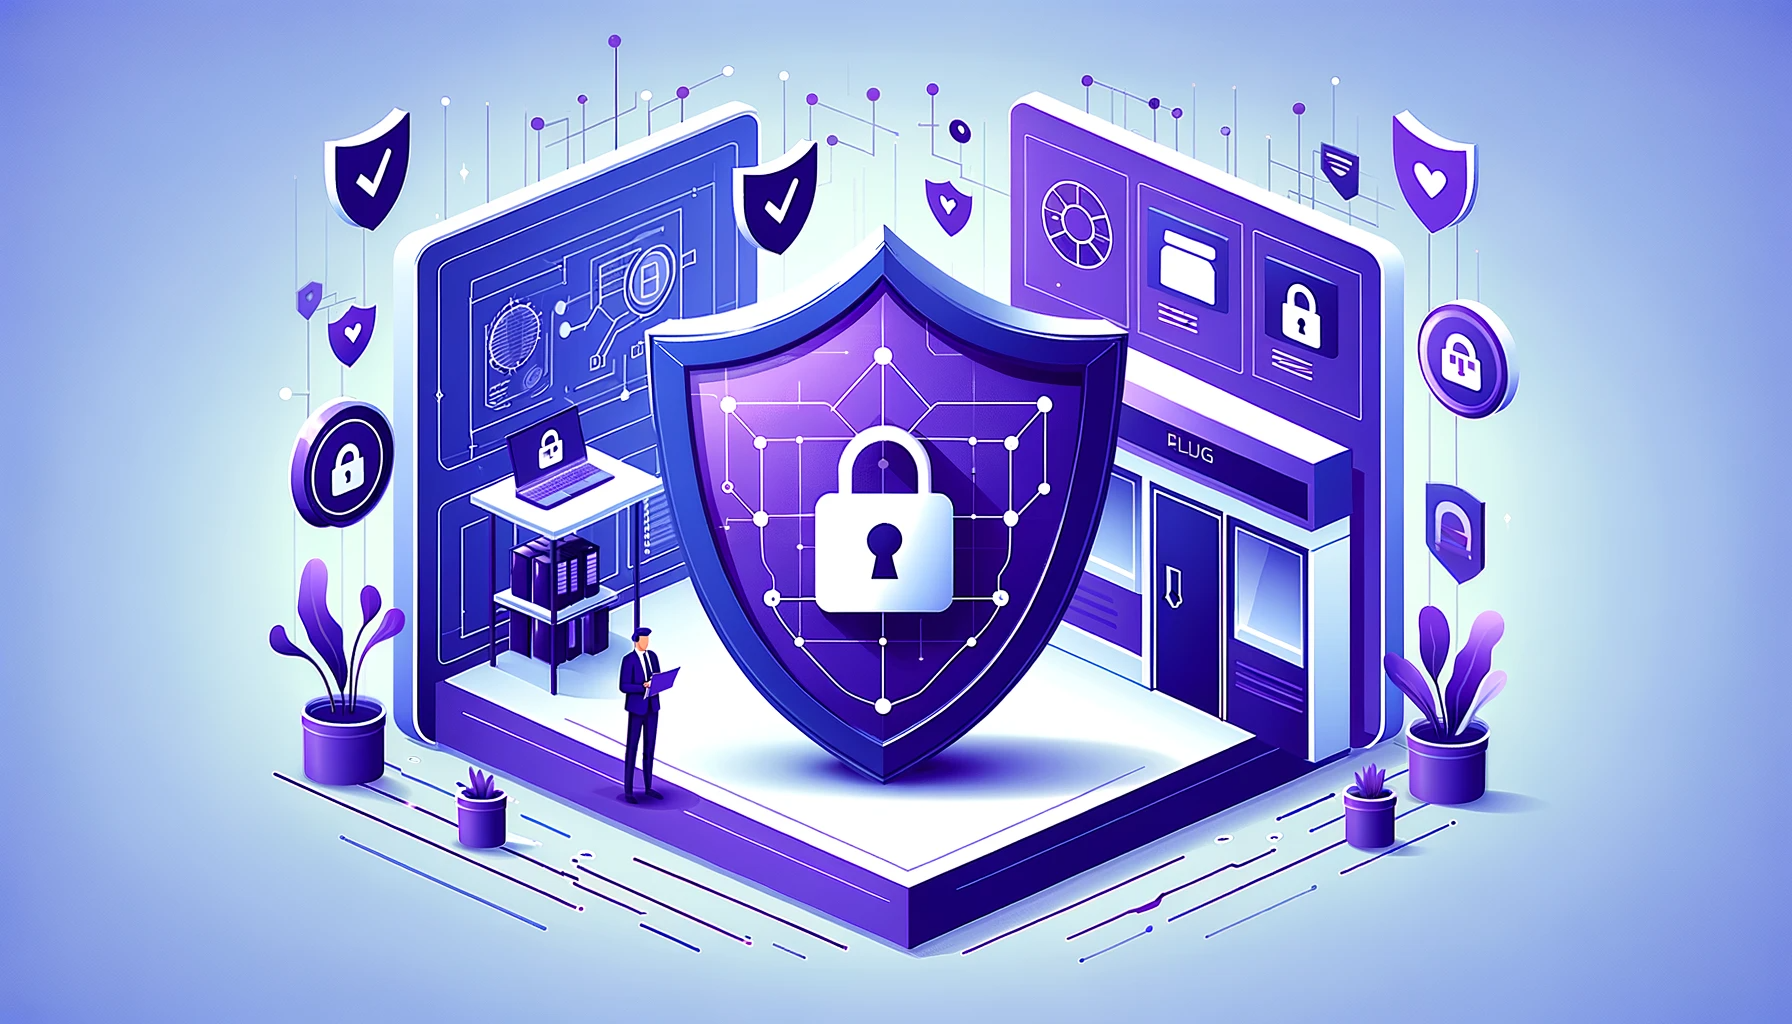 "Isometric illustration of a cybersecurity concept, featuring a figure studying a large digital shield representing data protection, surrounded by security icons and devices."